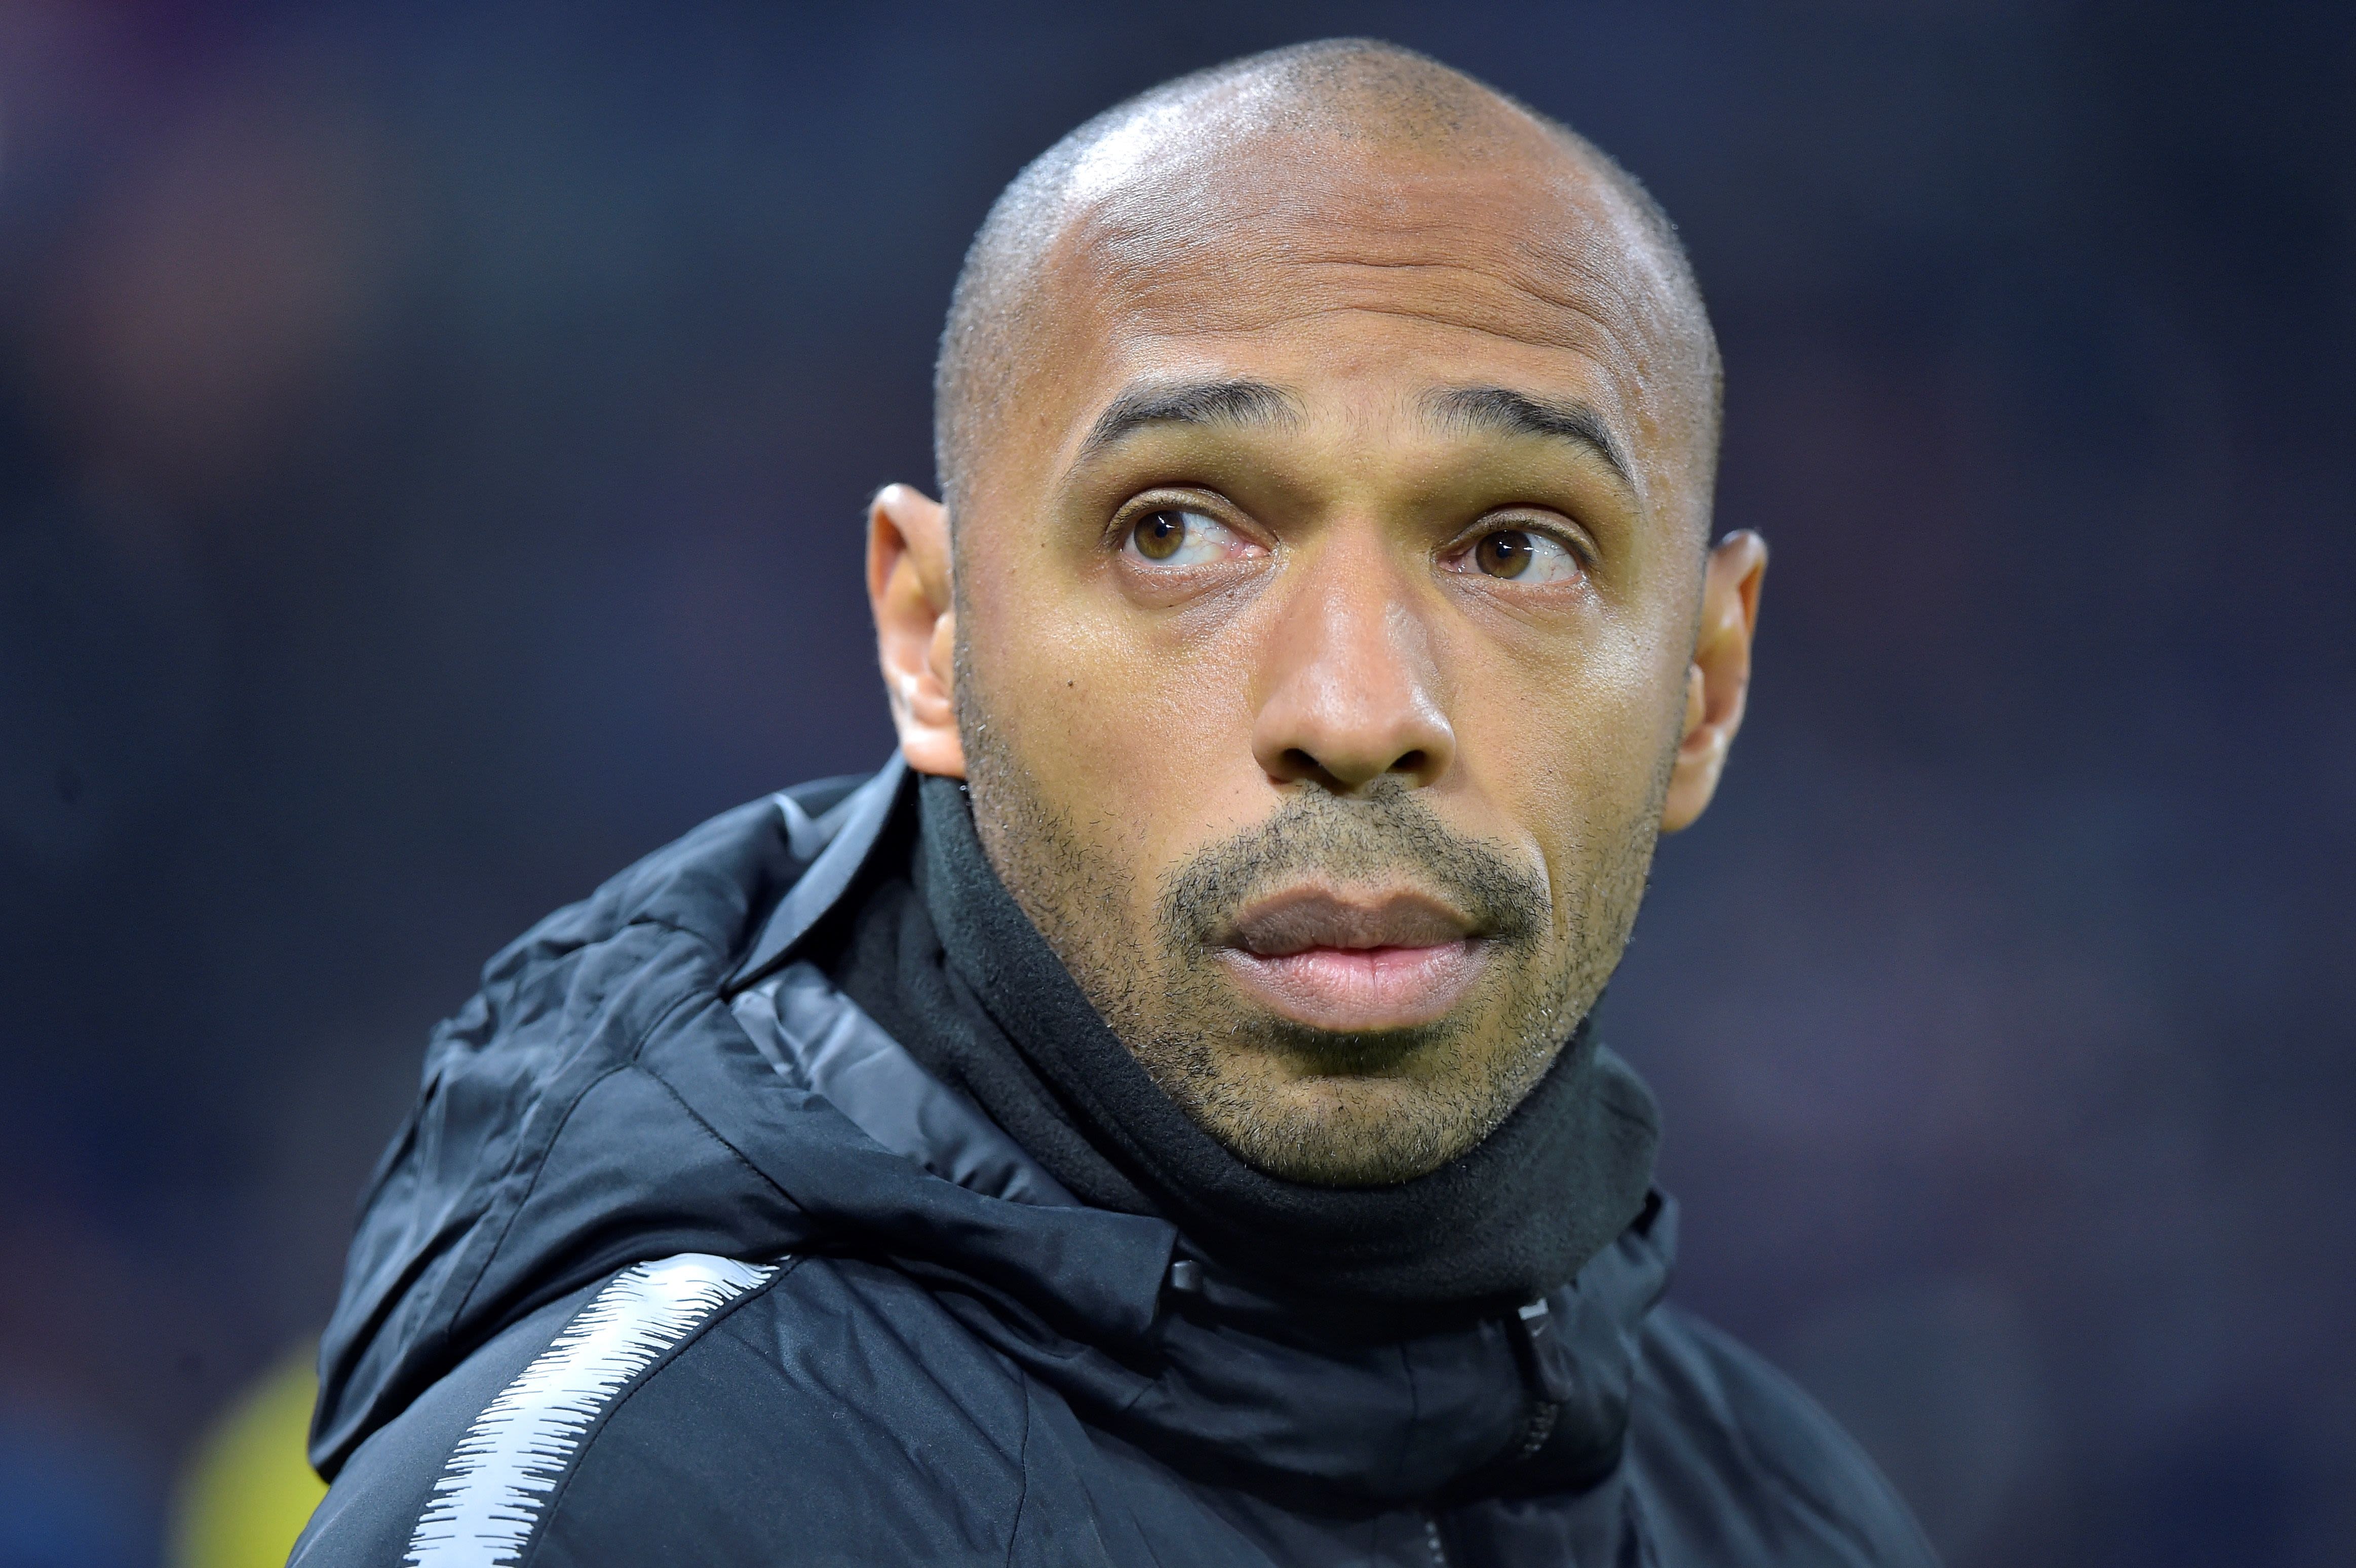 Thierry Henry's net worth and jaw-dropping £8million divorce